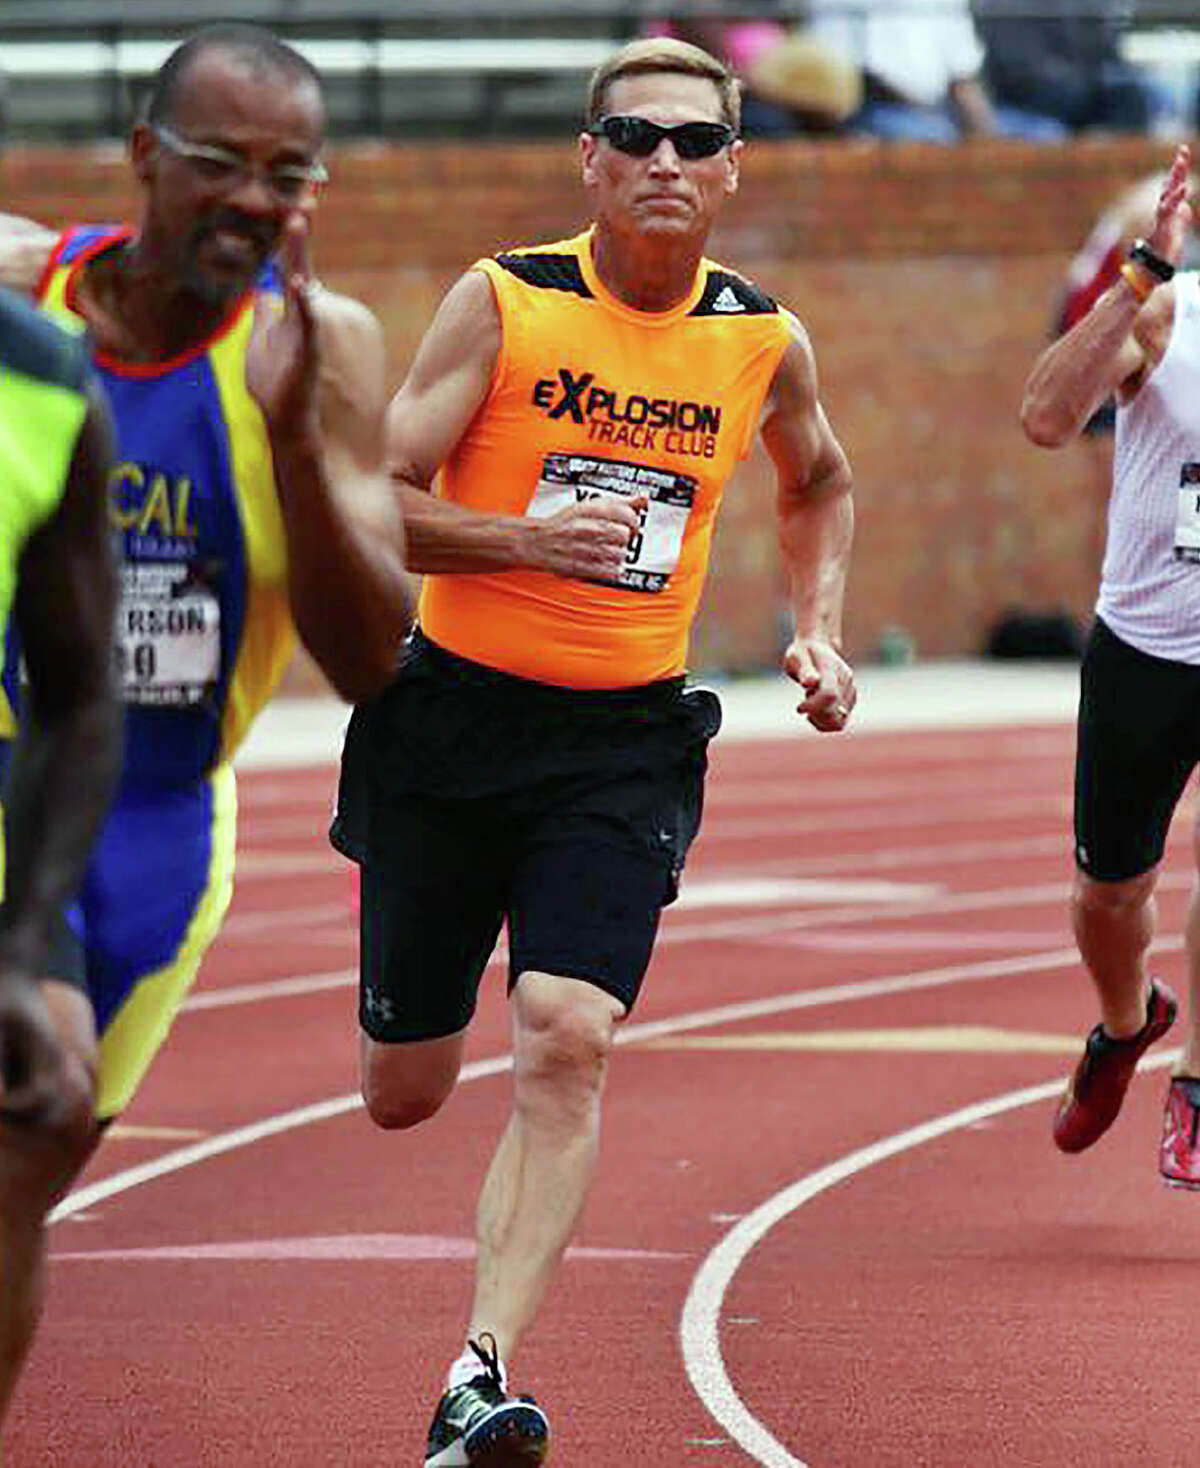 Wood River's Mike Young, opened his 2022 Masters Track and Field season with four first-place finishes at the Ozark Regional Indoor Championships at Principia College in Elsah. He is shown in a previous outdoor meet.